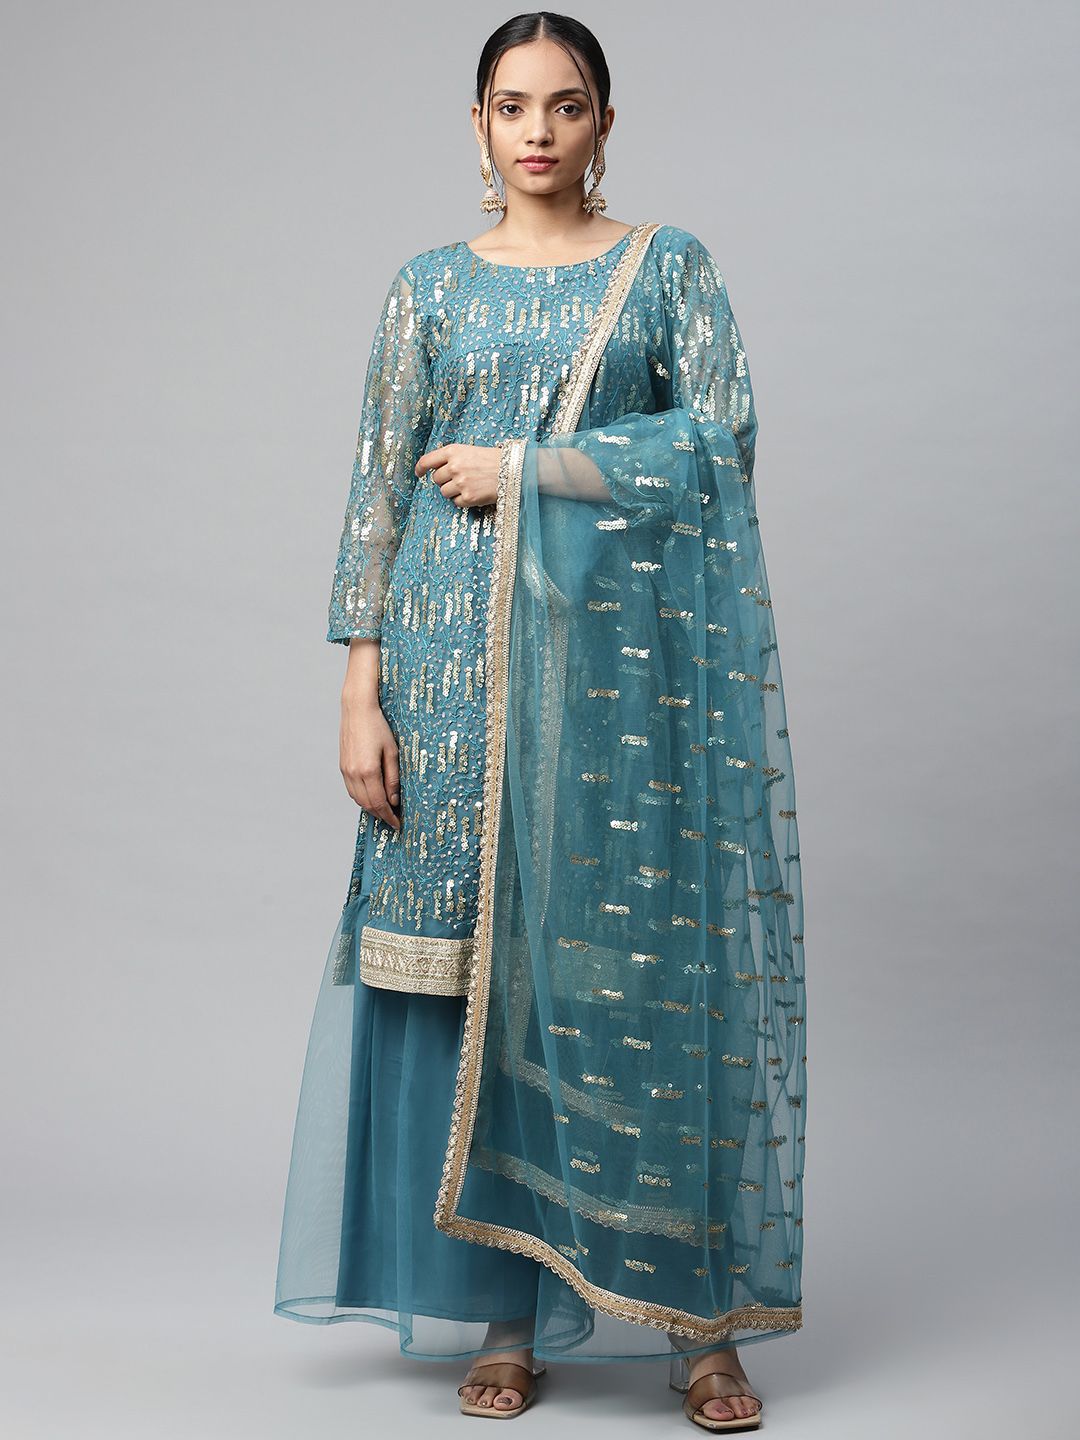 Readiprint Fashions Blue & Gold-Toned Embroidered Unstitched Dress Material Price in India